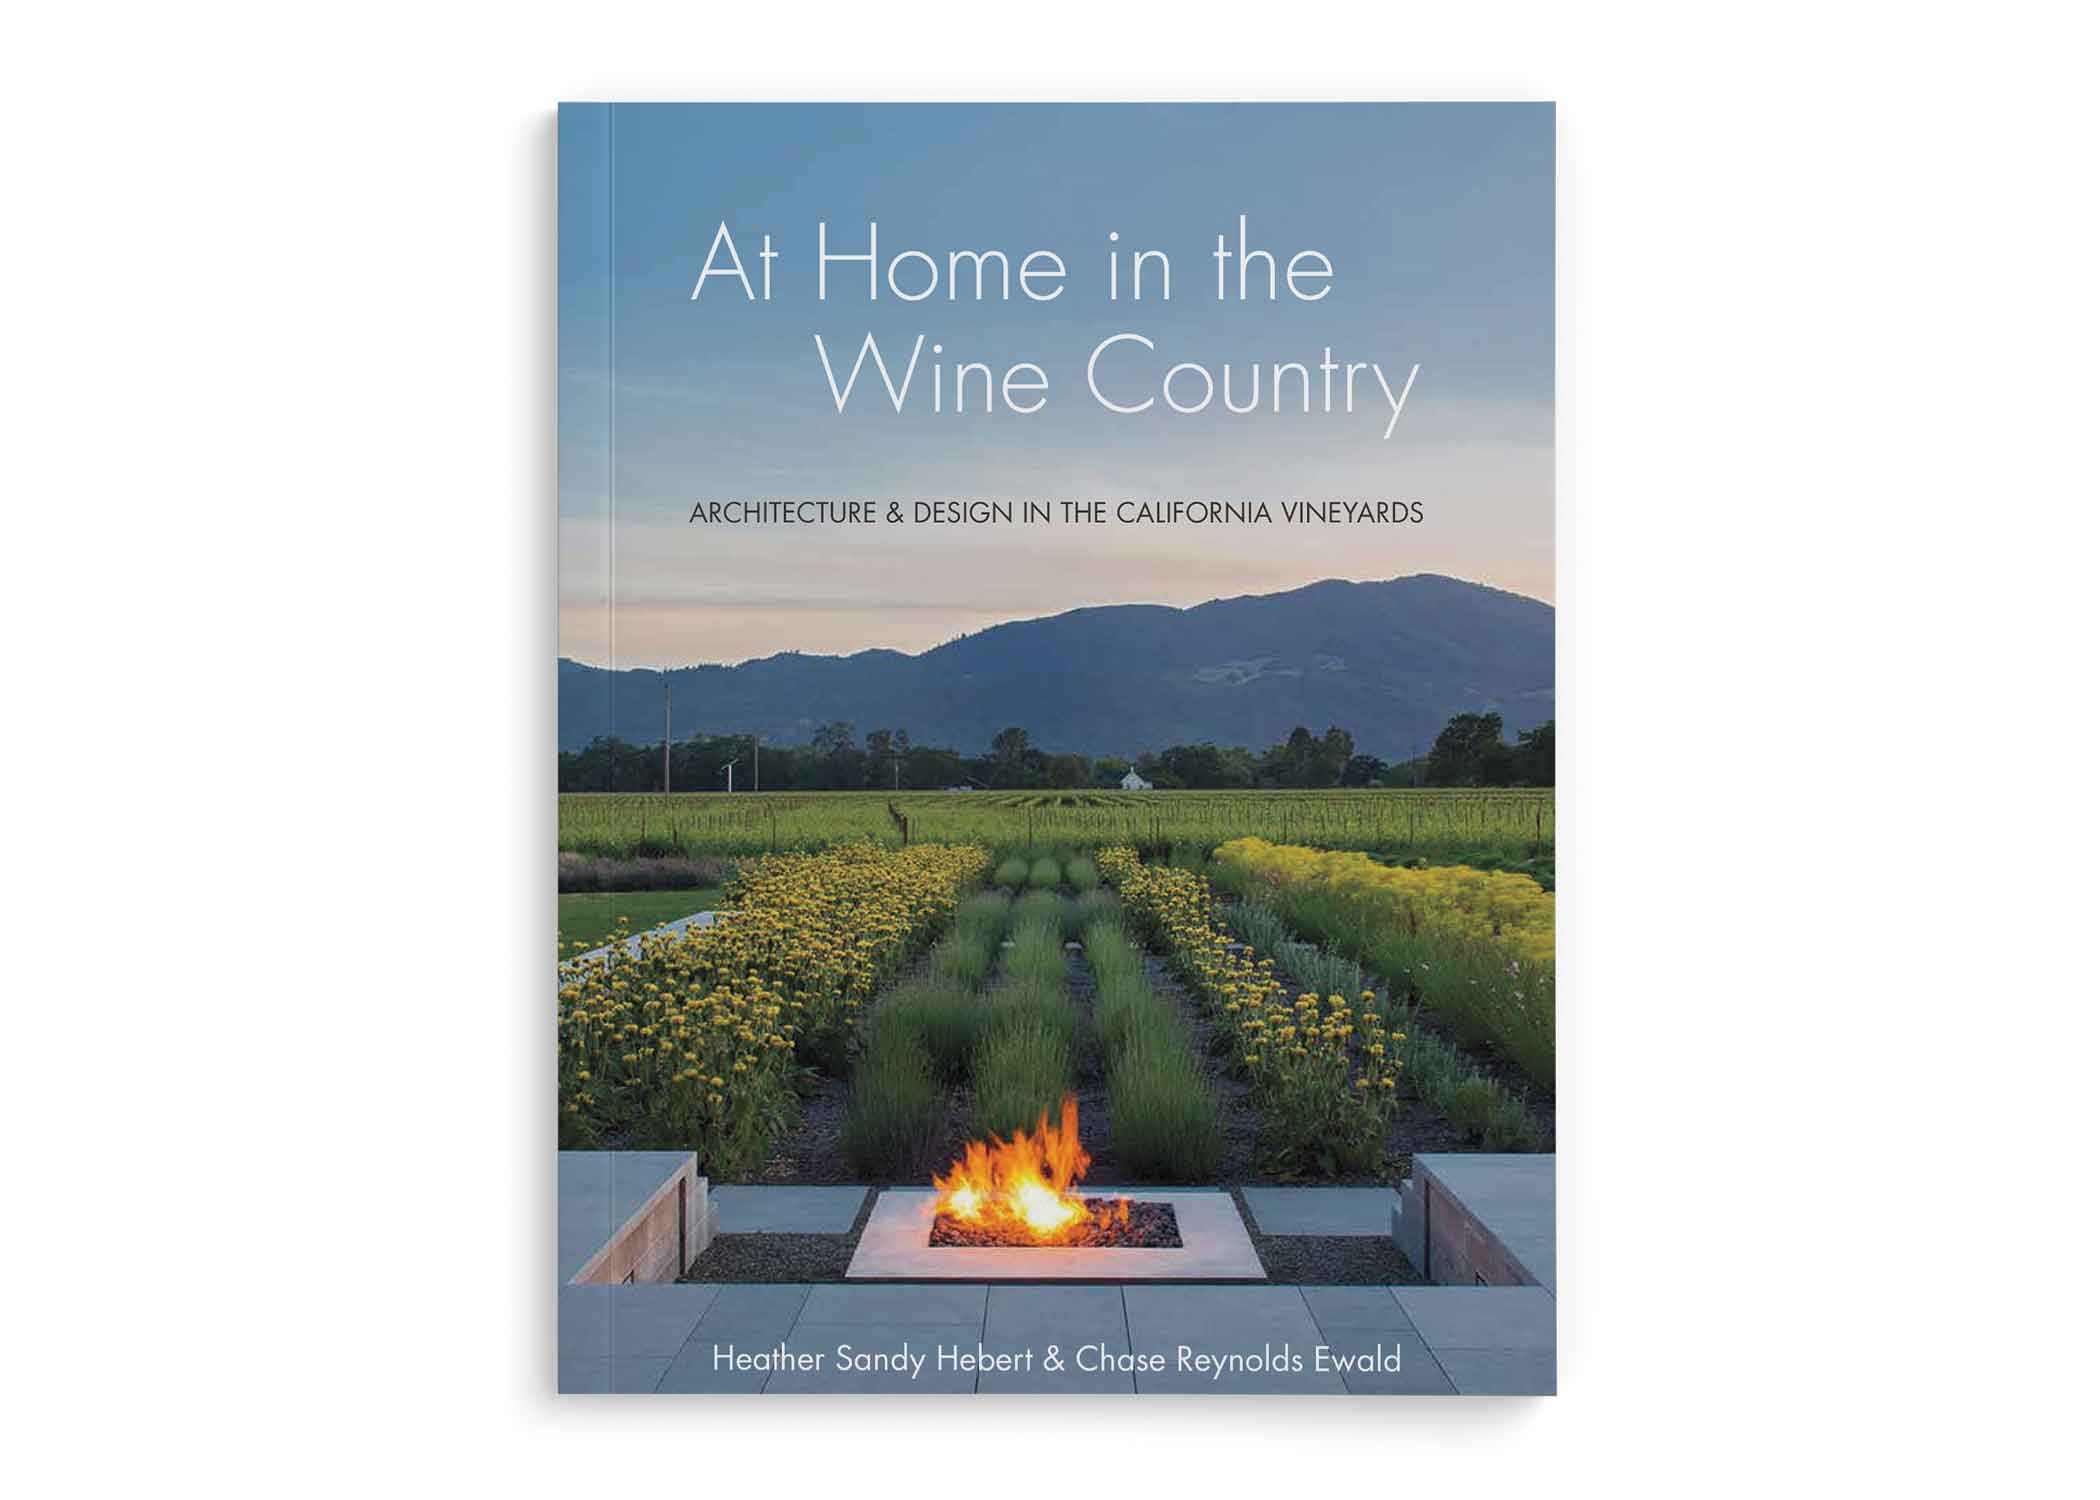 "At Home in the Wine Country: Architecture & Design in the California Vineyards"